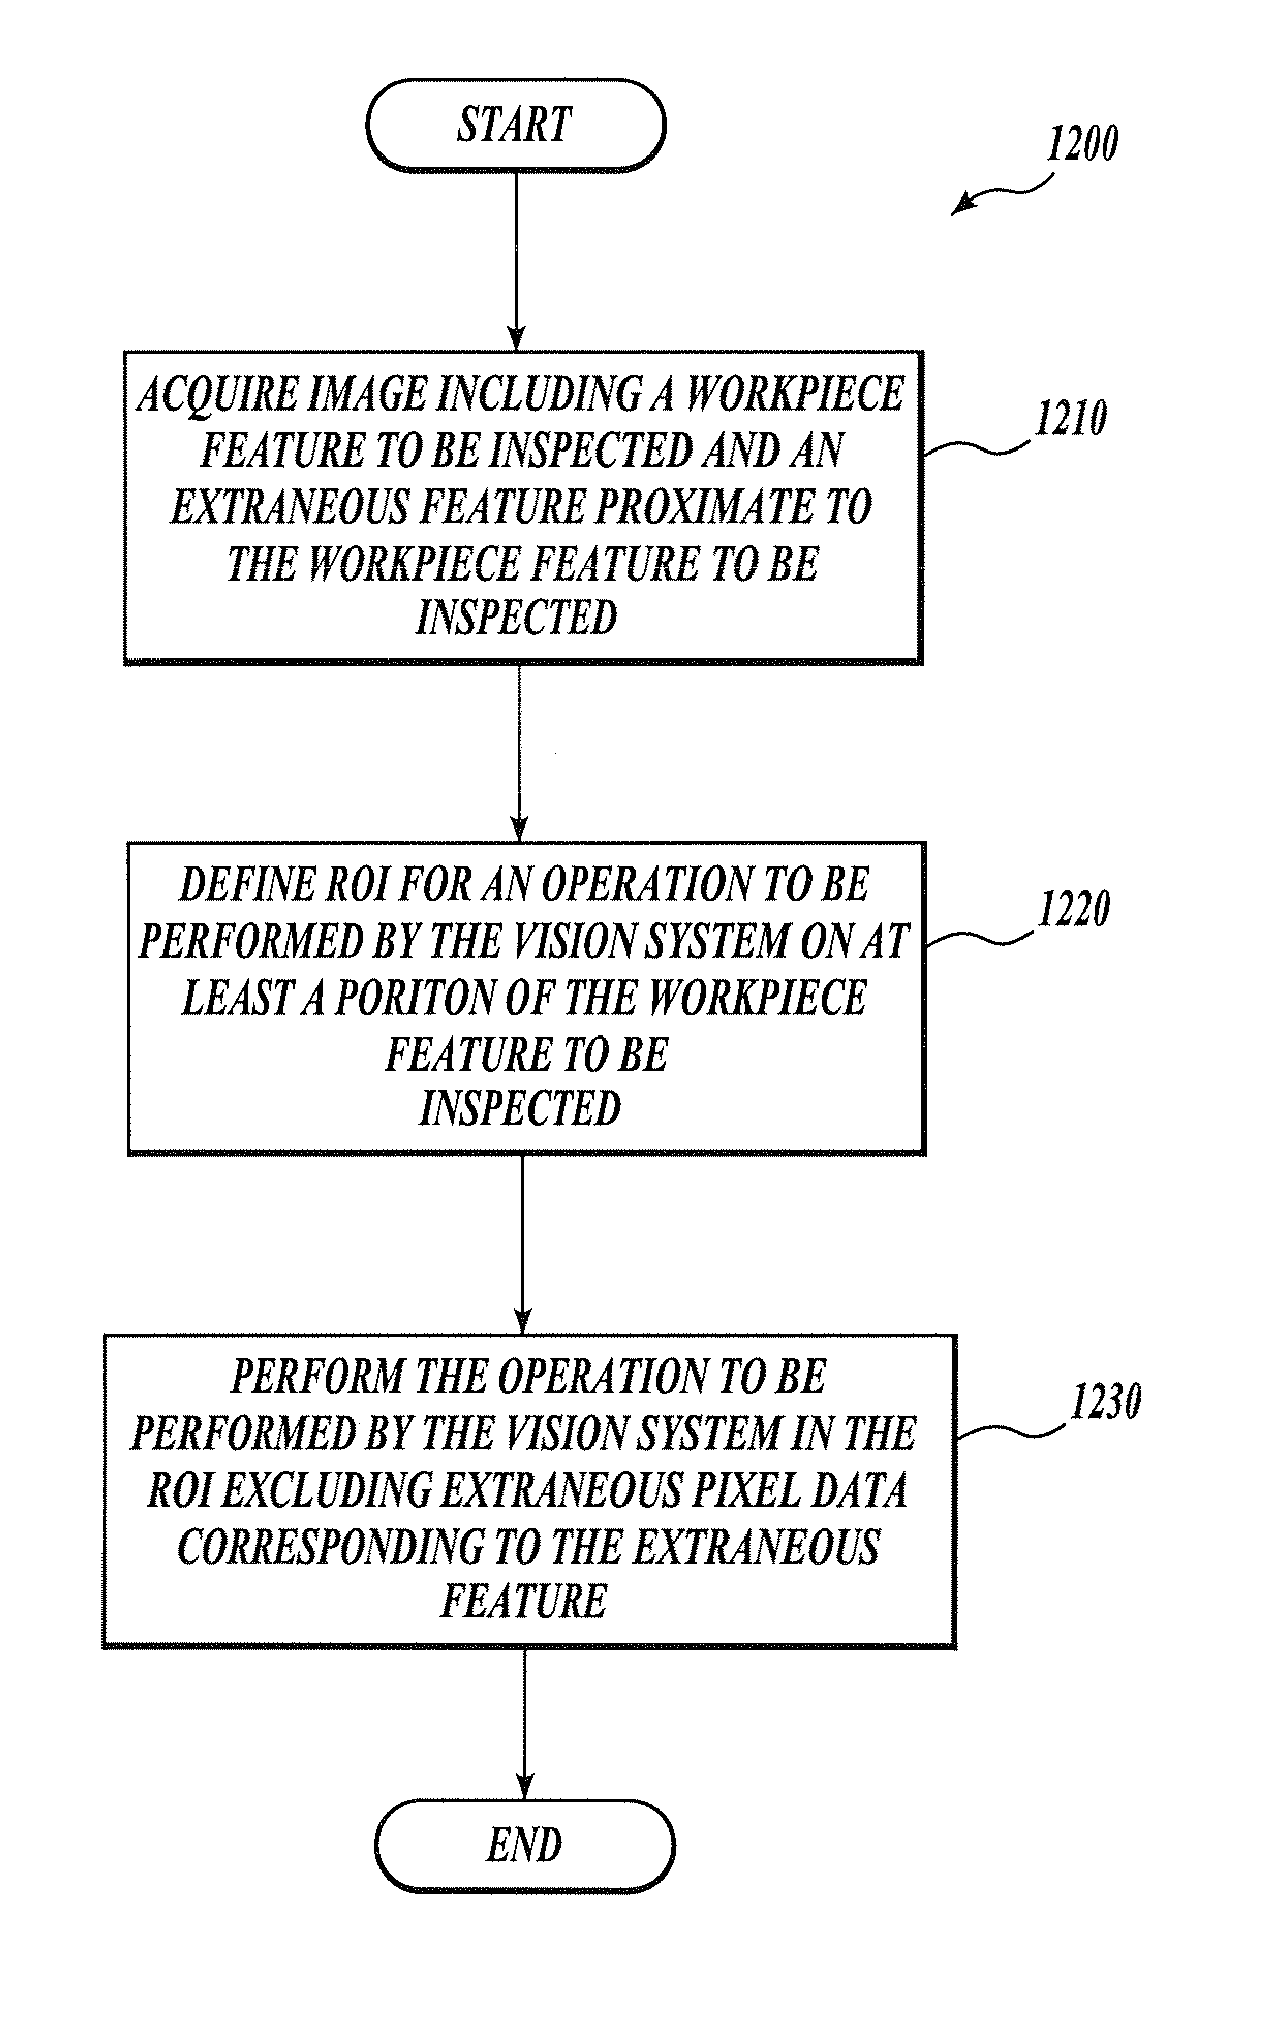 System and method for excluding extraneous features from inspection operations performed by a machine vision inspection system